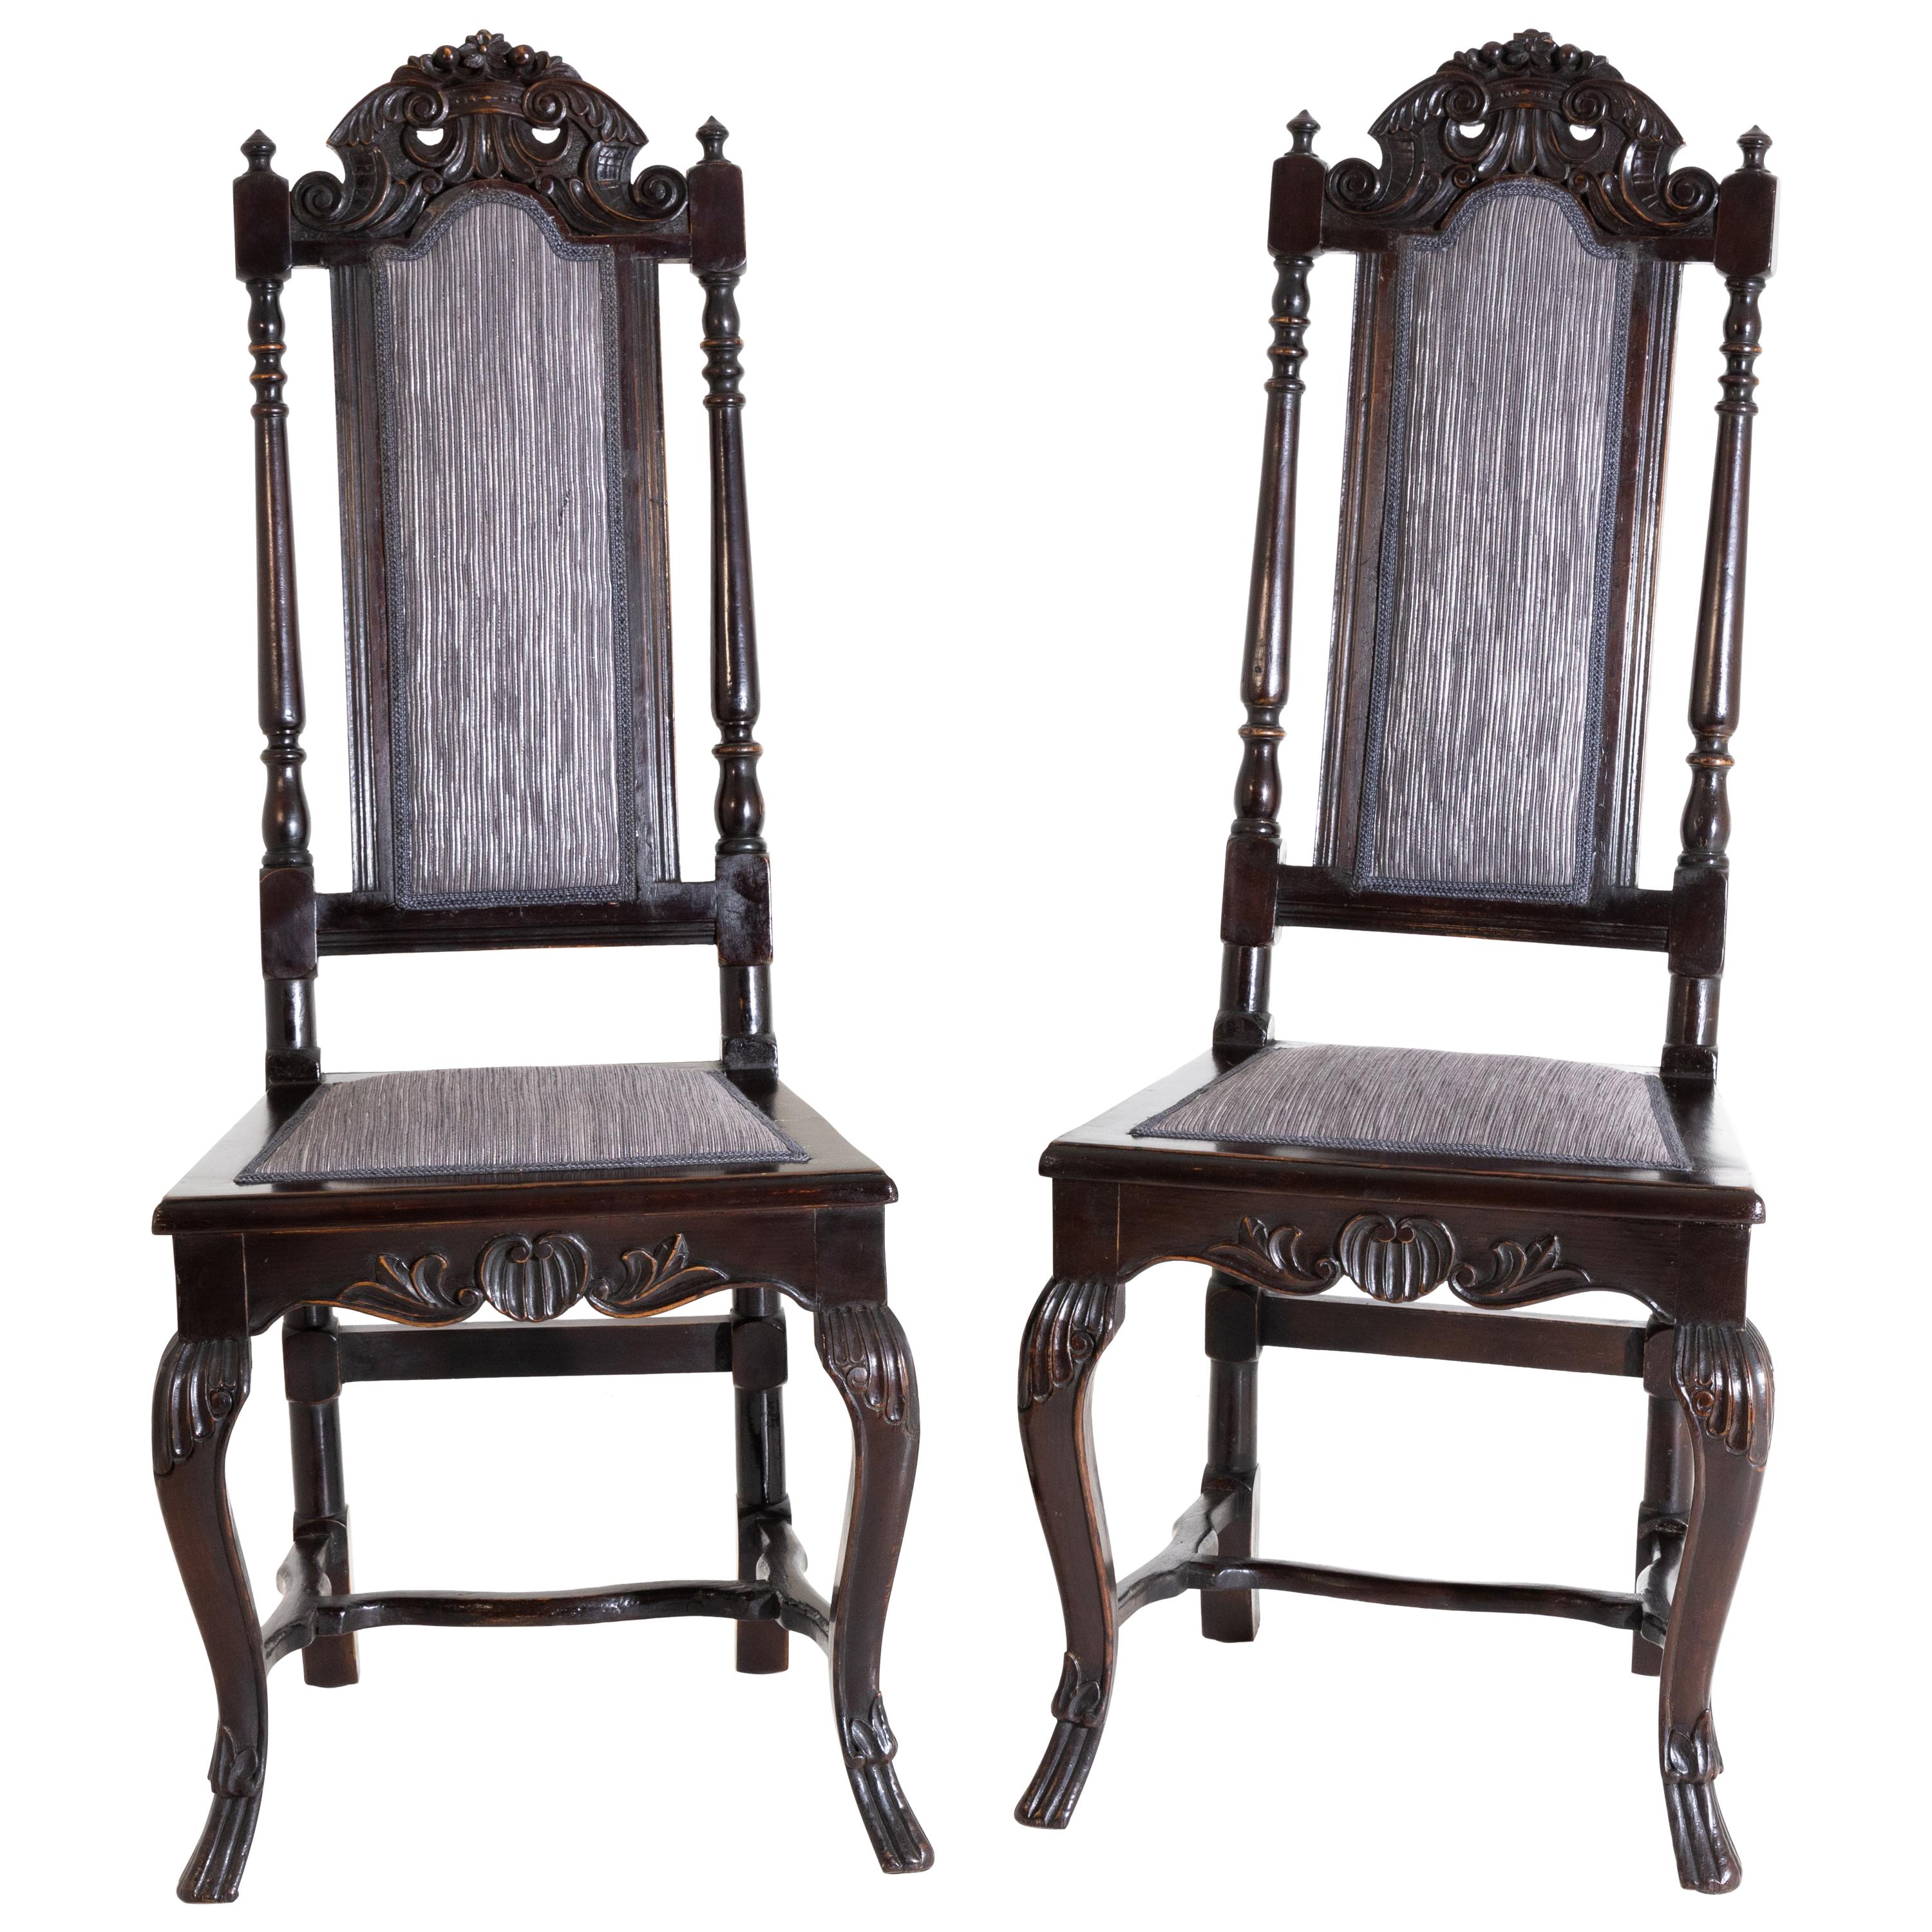 Baroque Dining Room Chairs, Saxony / Germany, 18th Century